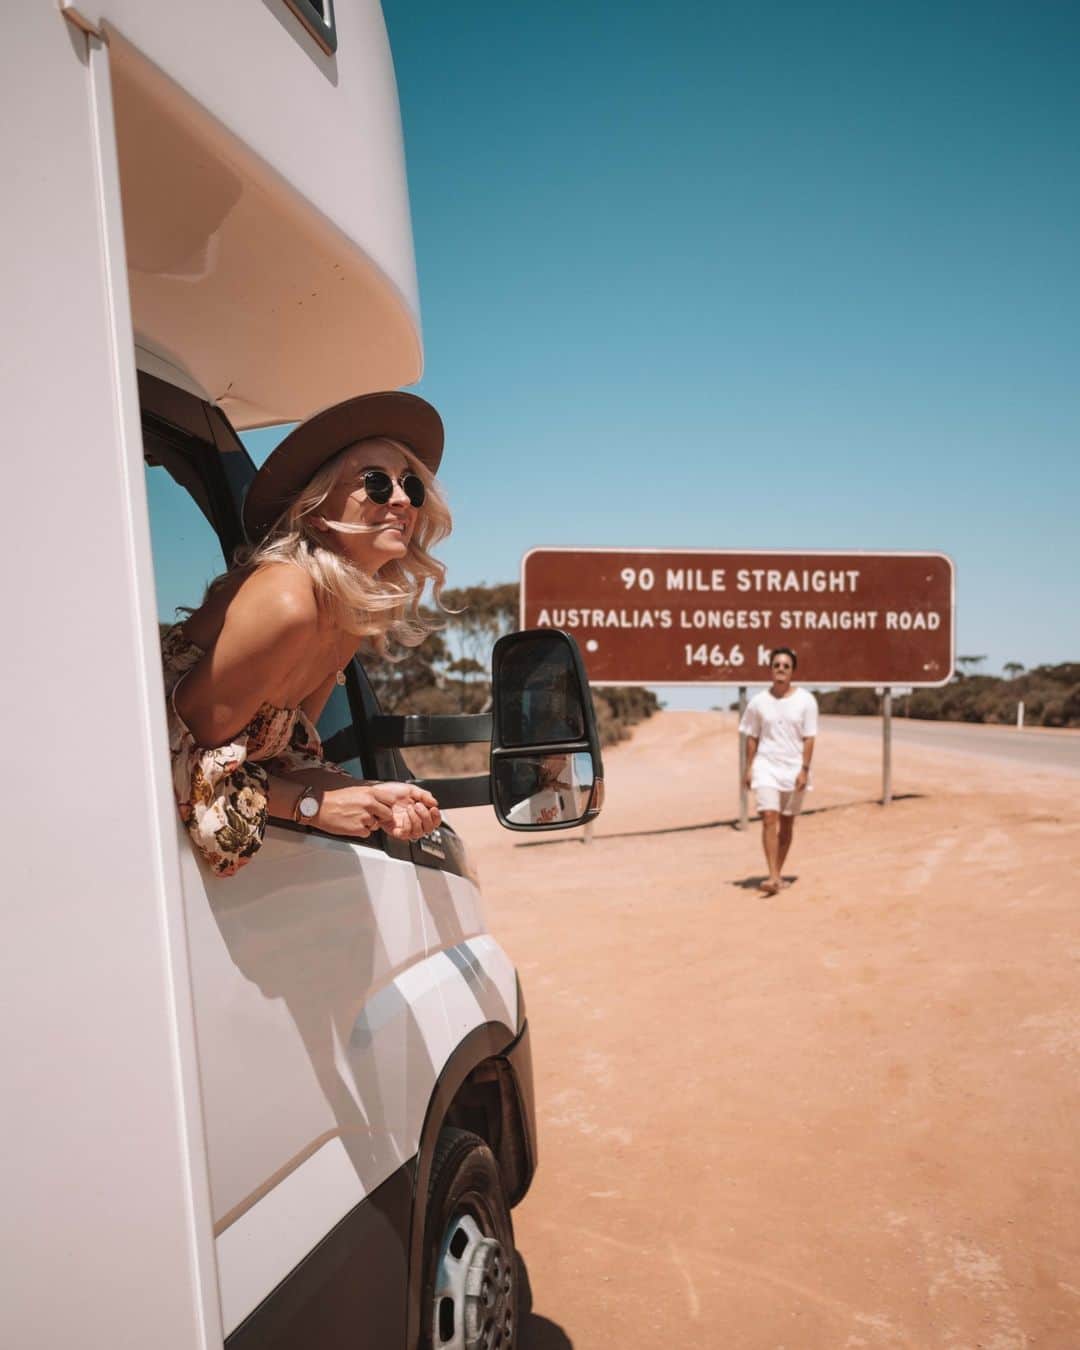 Australiaのインスタグラム：「The epic #Aussie outback needs no introduction 🙌 When it comes to road trip adventures, the #EyreHighway is up there with the best of them. Crossing the #NullarborPlain between Norseman in @westernaustralia and Caiguna in @southaustralia is an iconic journey; where you're sure to uncover interesting people and places along the way 🚙. You'll travel both the dramatic coastline of @eyrepeninsula and the rugged plains of @australiasgoldenoutback, and calling into the famous @nullarborroadhouse is a must.  #SeeAustralia #ComeAndSayGday #WATheDreamState #GoldenOutback  ID: A woman leans out of a car window wearing a hat and sunglasses while smiling, as a man walks across a sandy landscape with a brown sign behind him reading ‘90 Mile Straight, Australia’s longest straight road, 146.6km'」